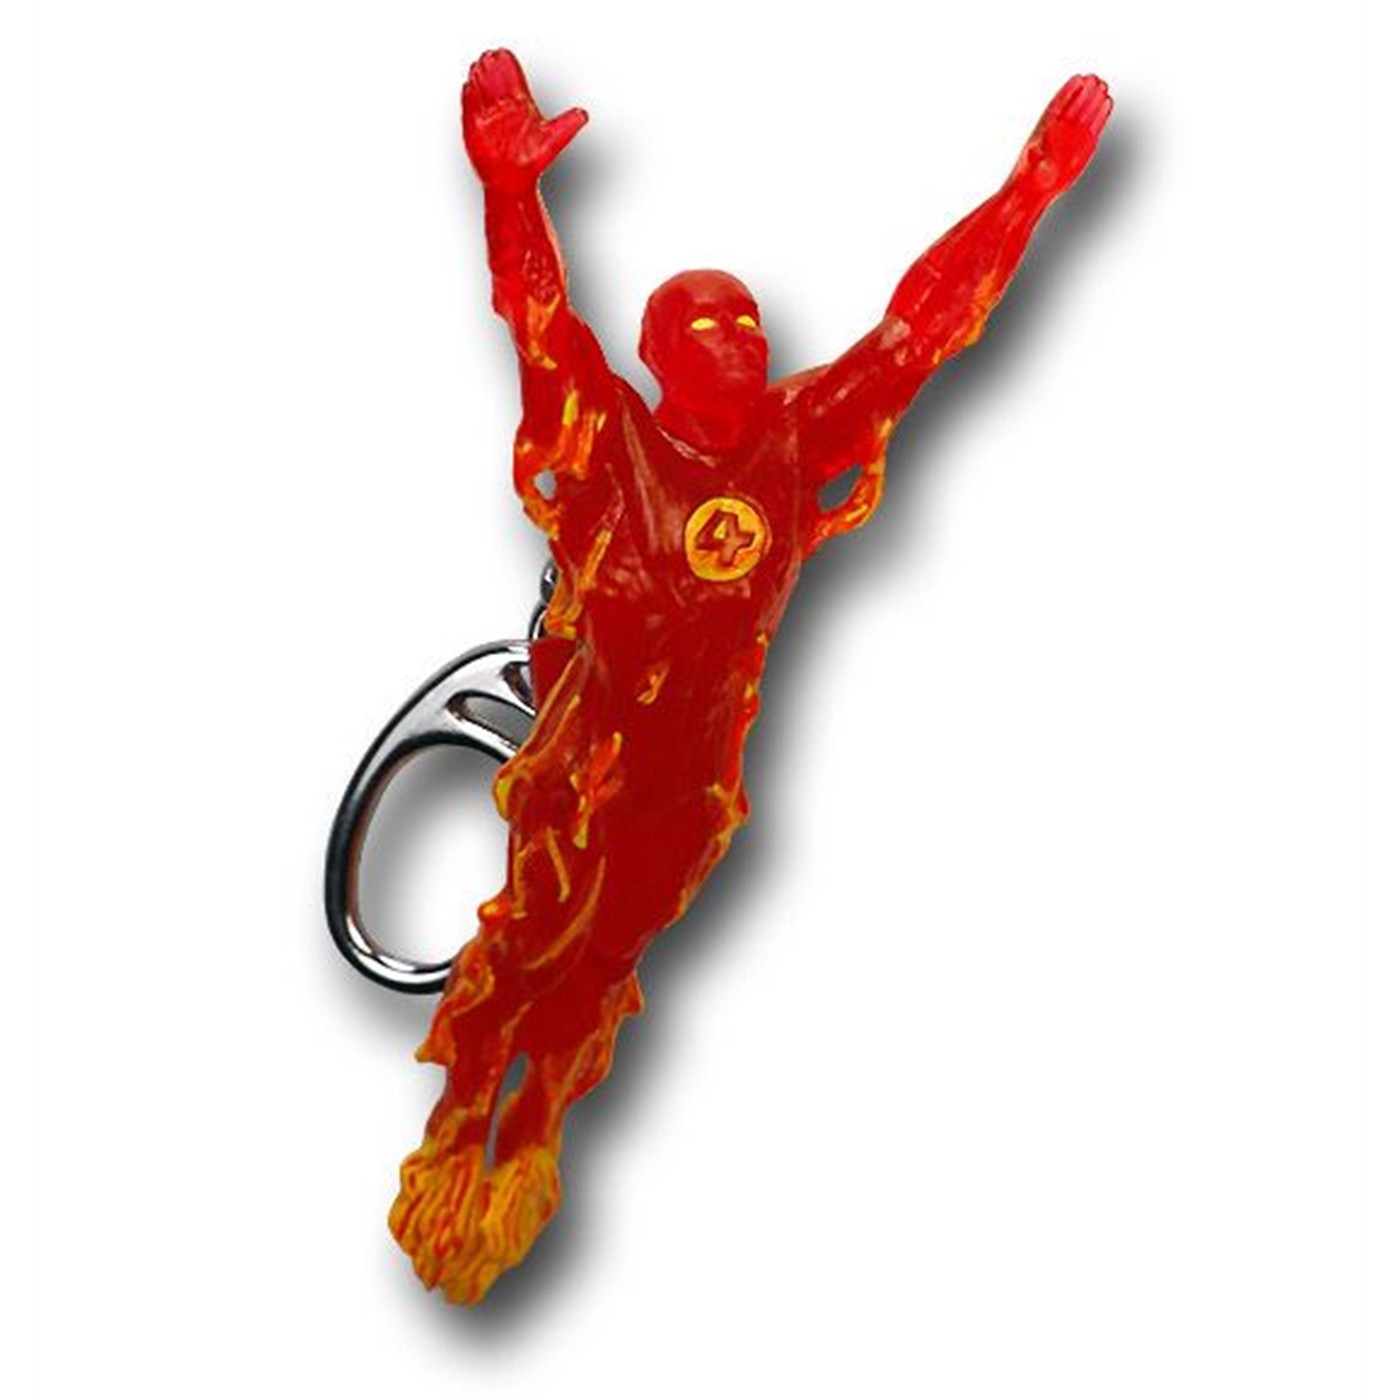 The Human Torch Figural Keychain